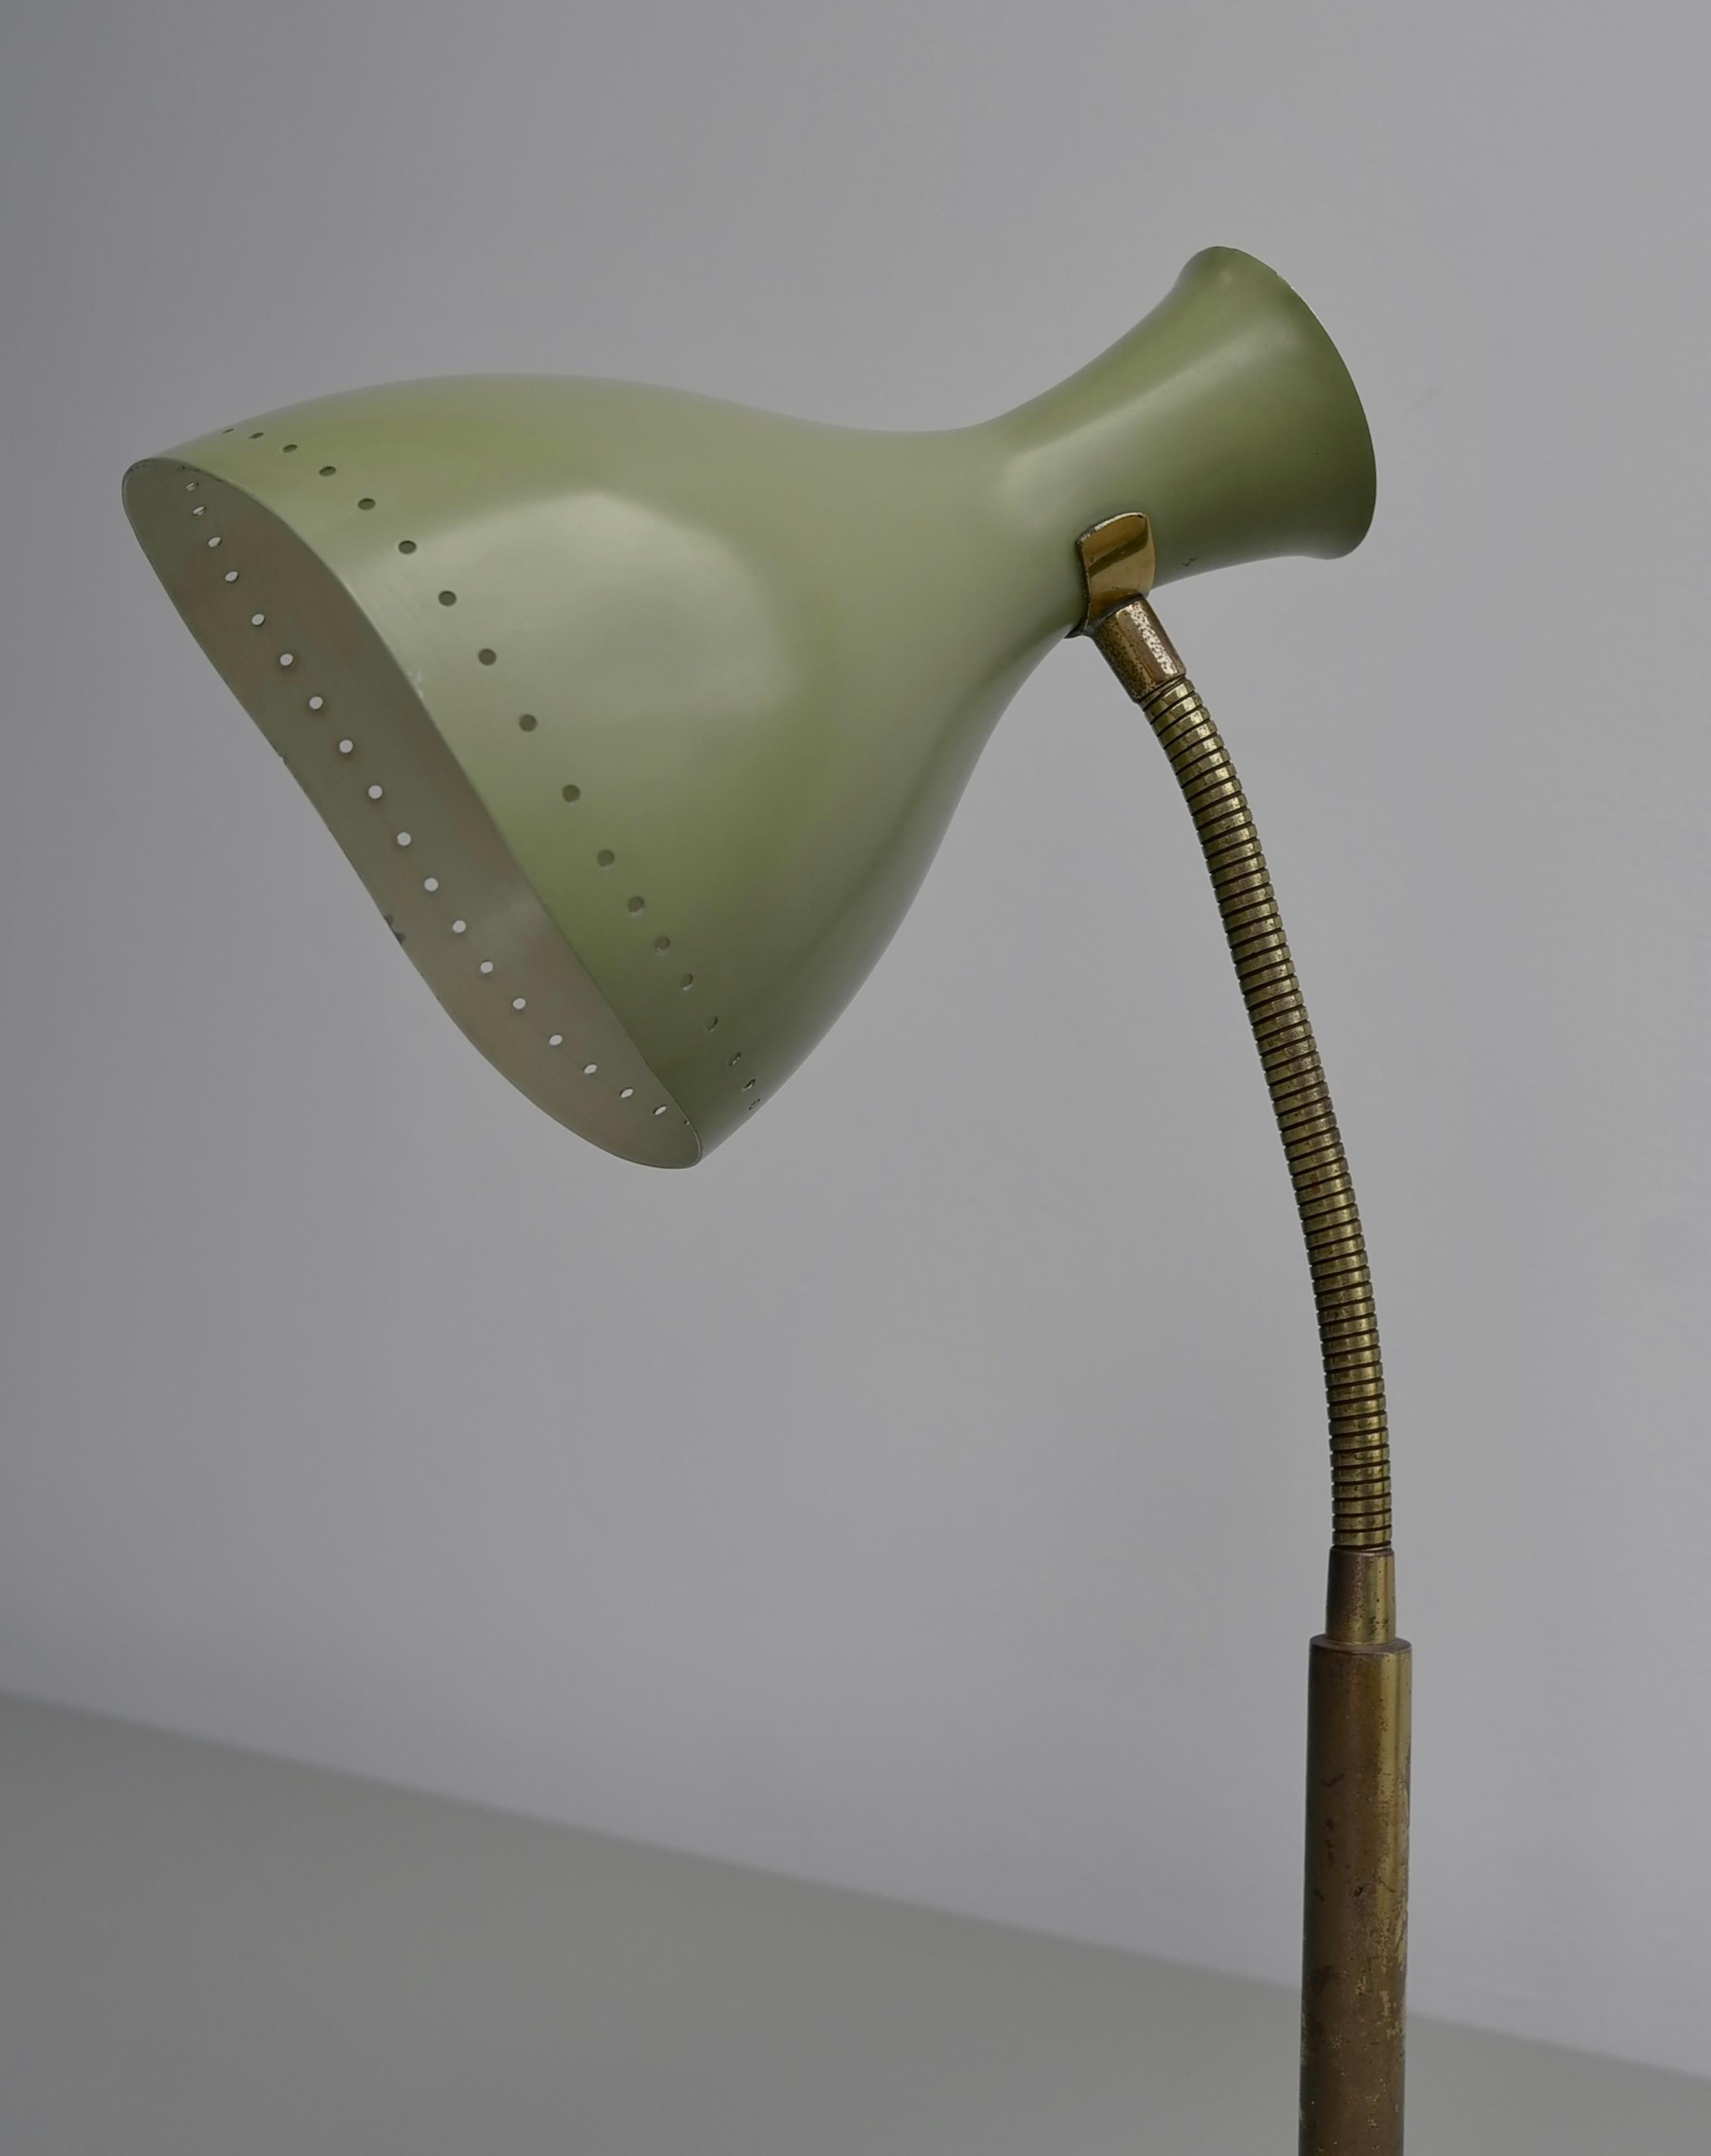 Olive green table lamp with brass details, Italy 1950's

Very well made piece with fine detail. Most probably made by Stilnovo or Stilux.